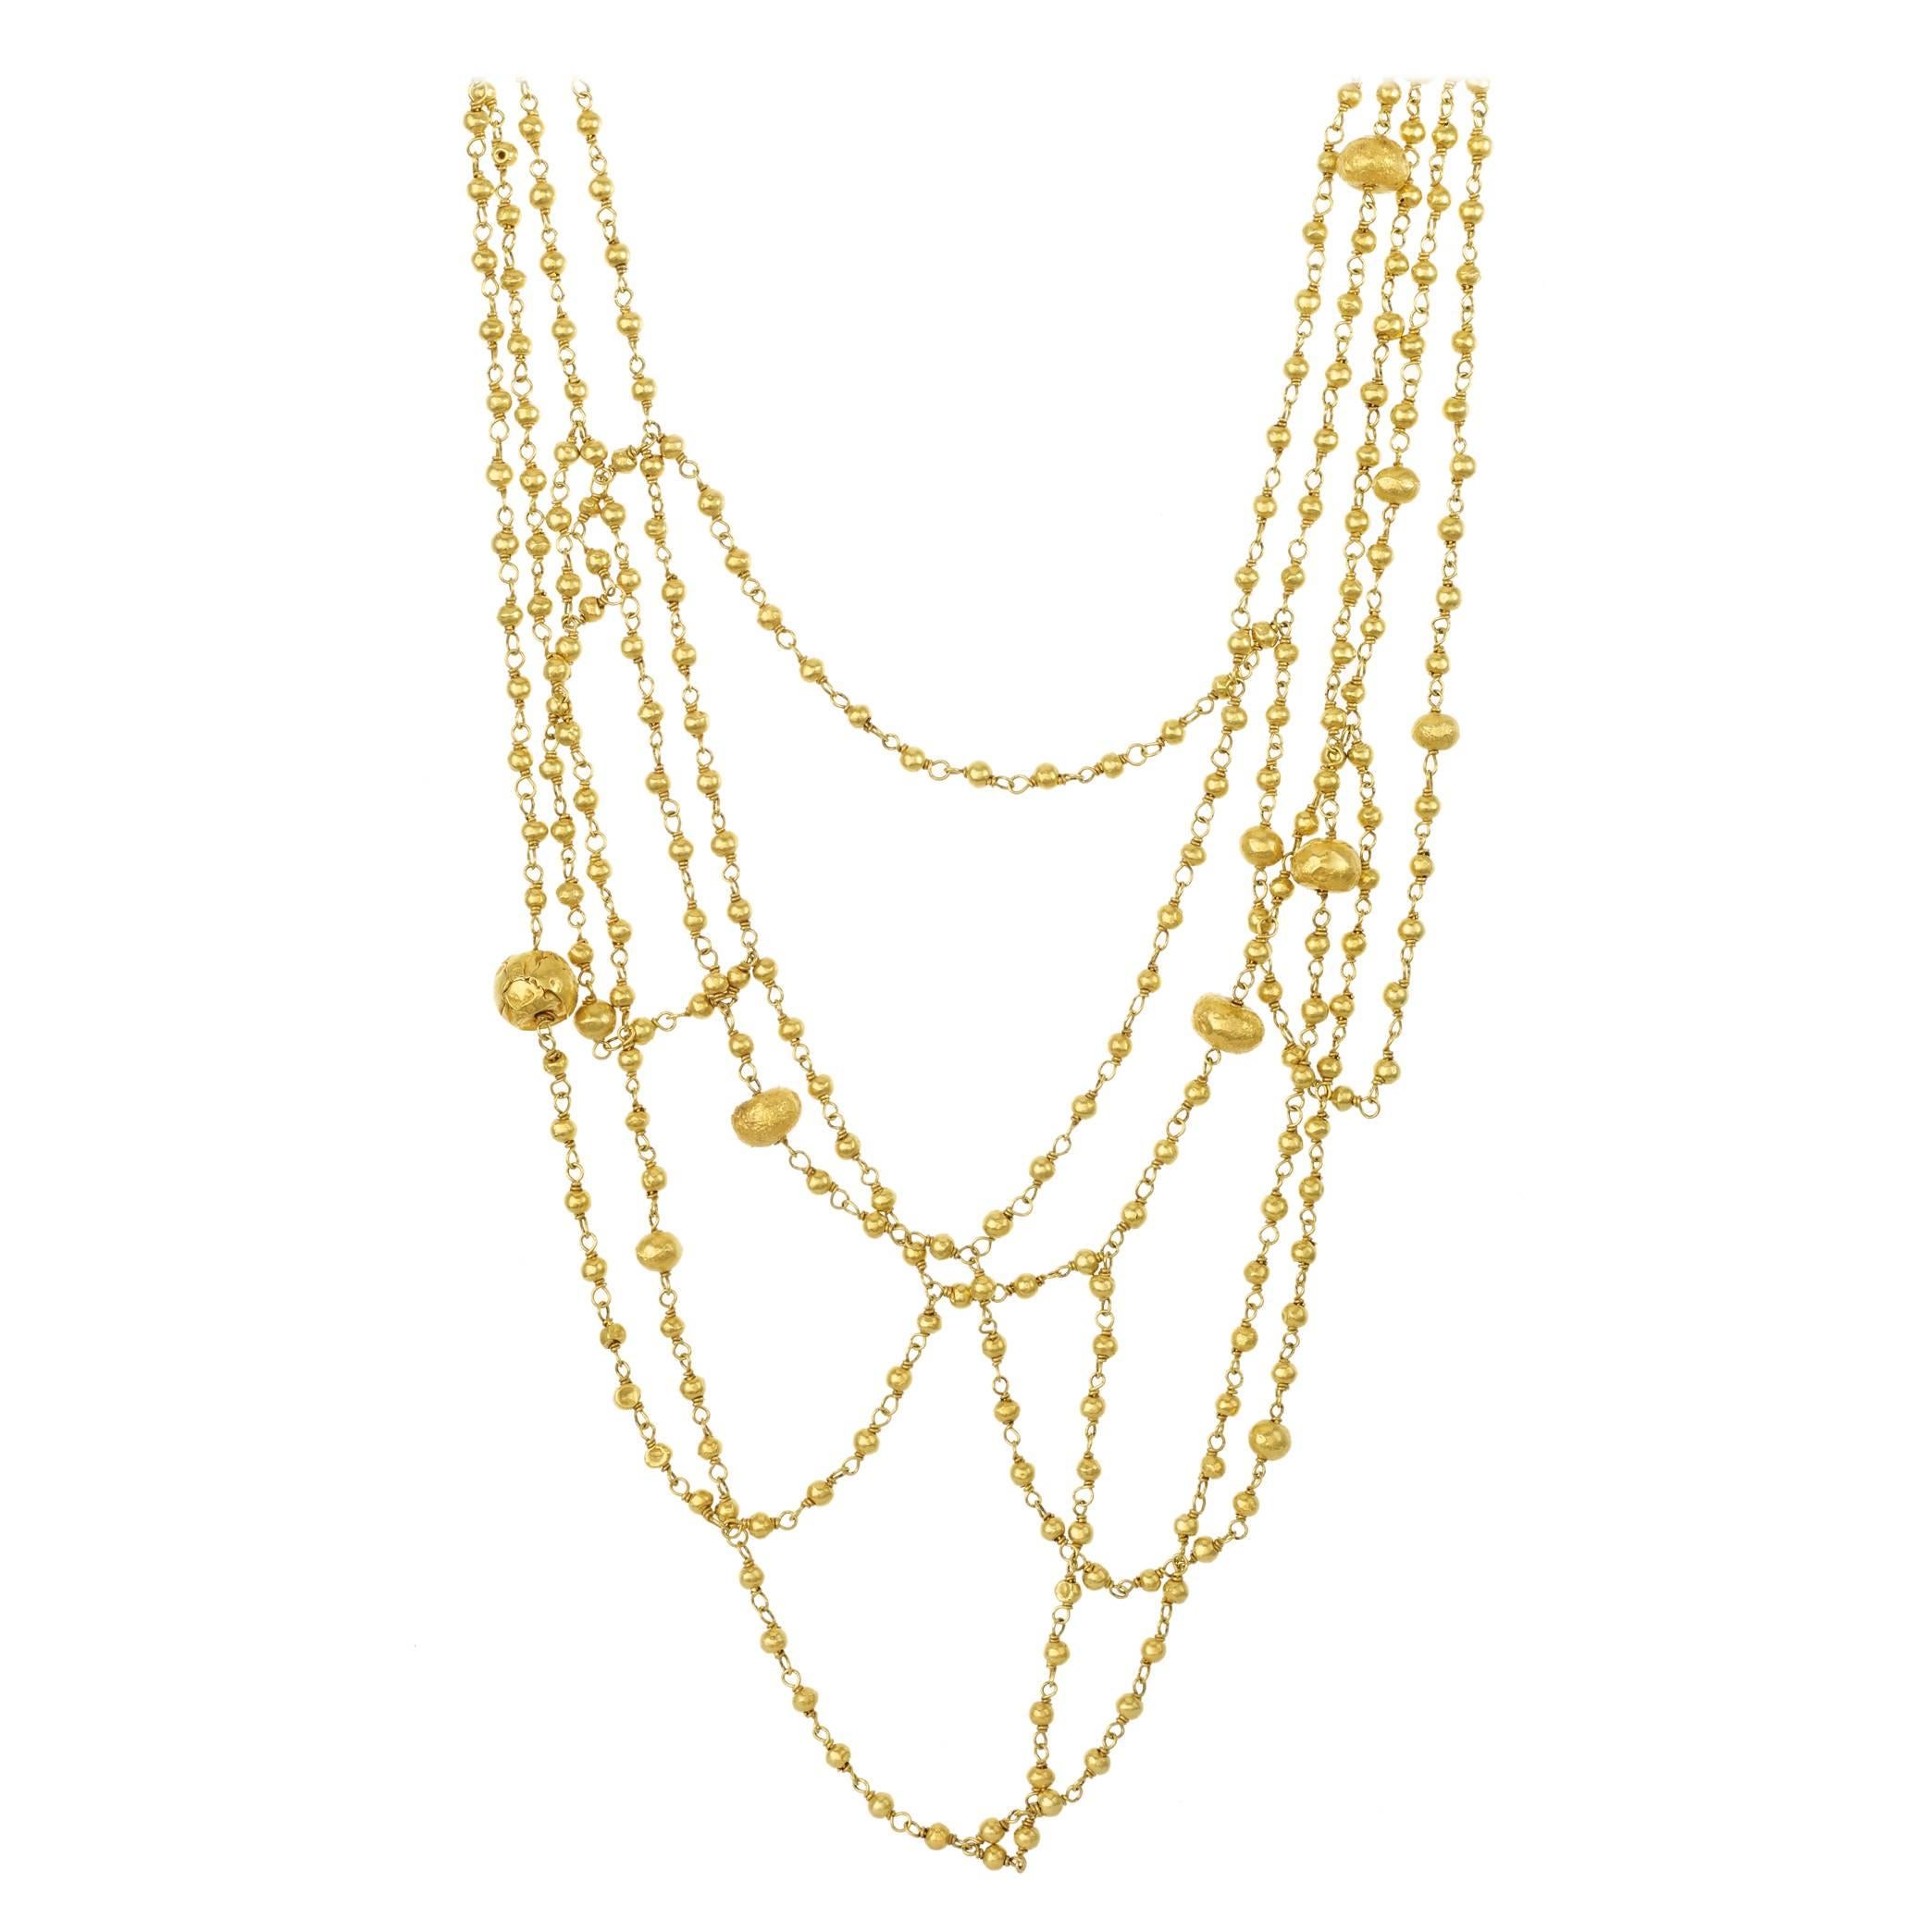 Pippa Small Multi-Strand Gold Bead Tangle Necklace For Sale